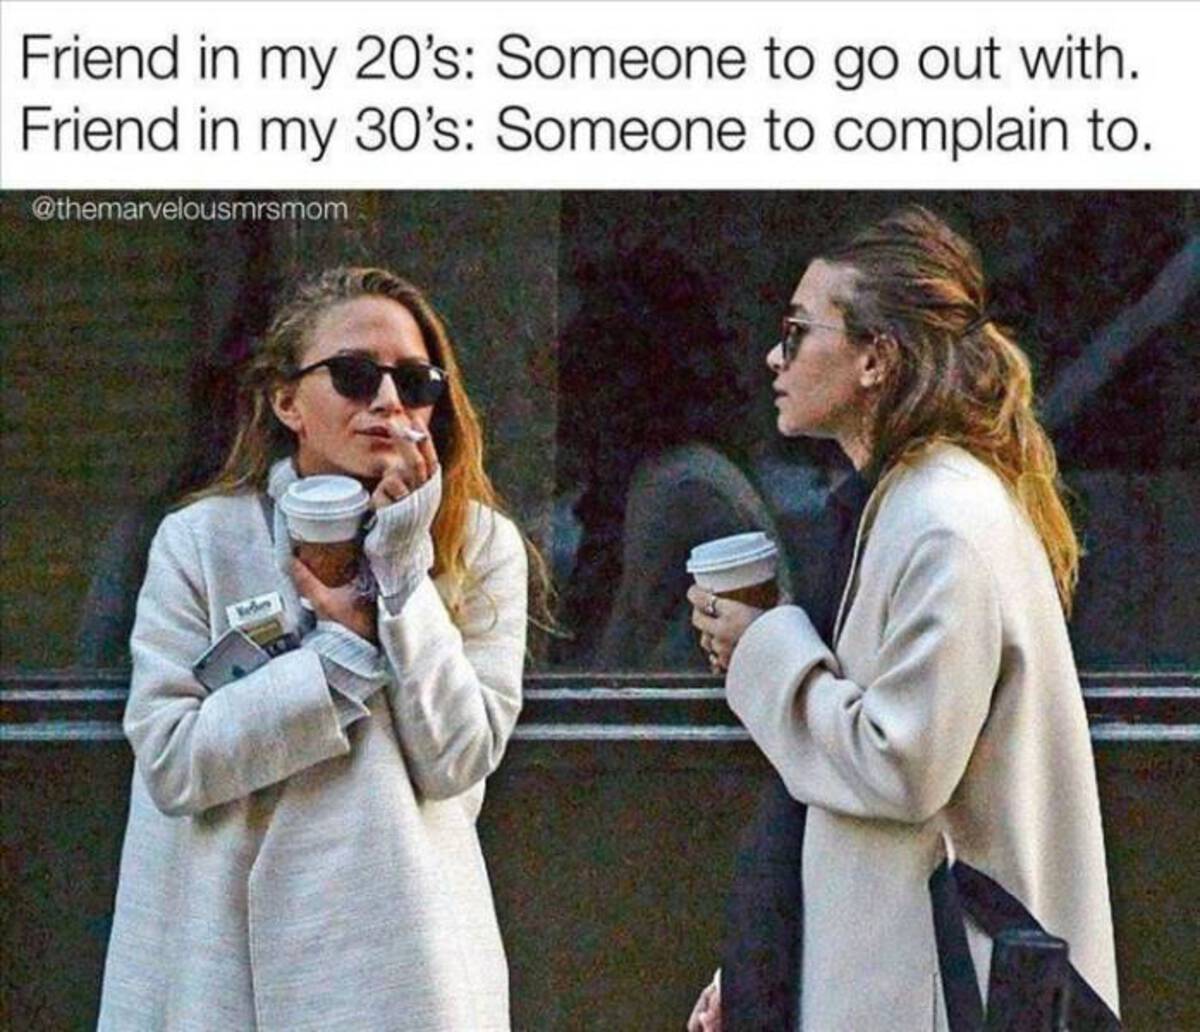 mary kate and ashley now smoking - Friend in my 20's Someone to go out with. Friend in my 30's Someone to complain to.